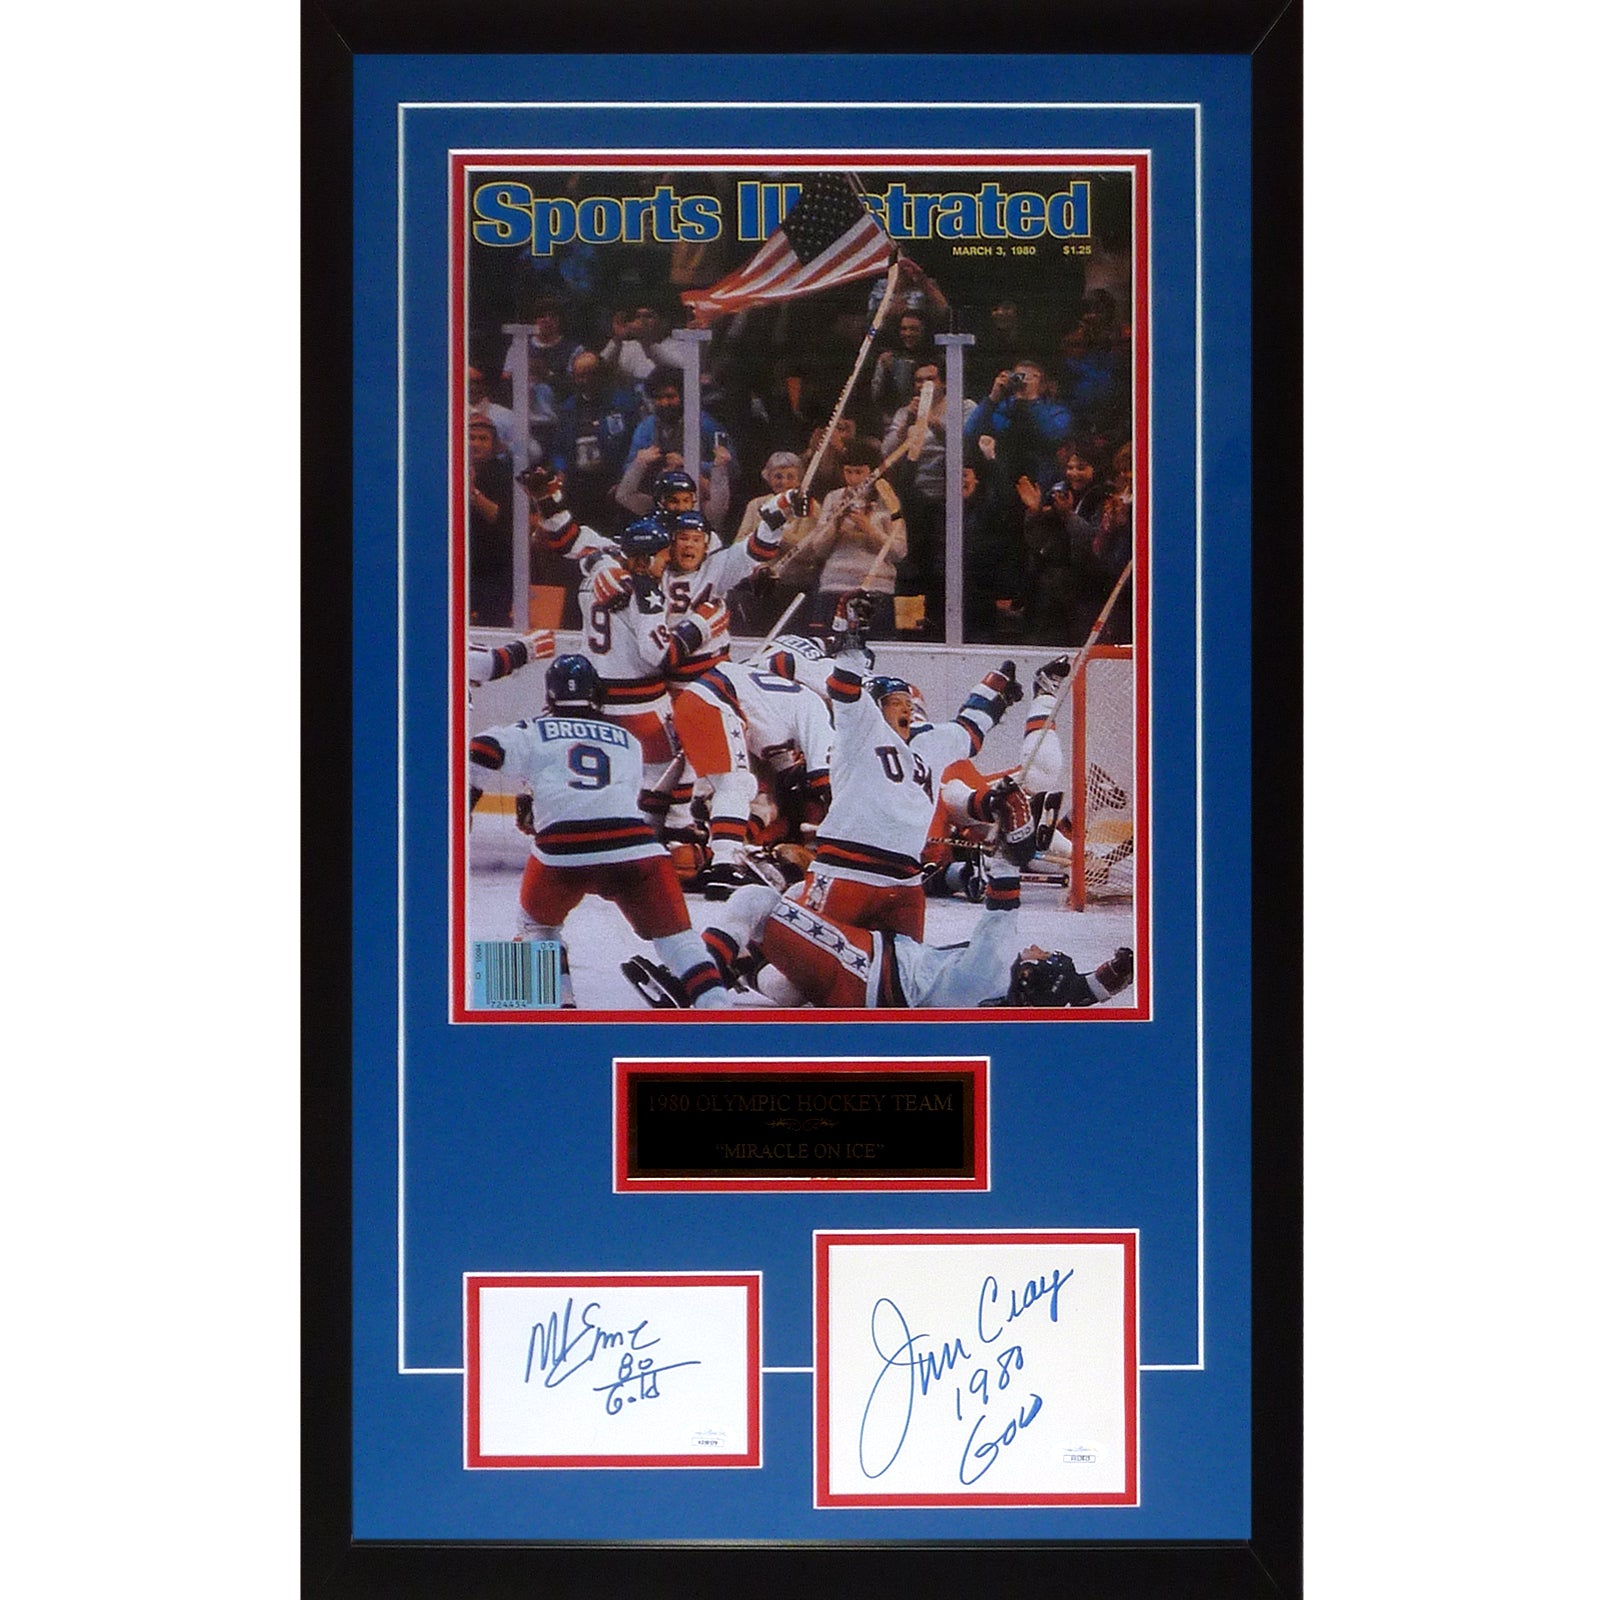 Jim Craig Autographed 1980 USA Hockey Deluxe Framed 8x10 Photo w